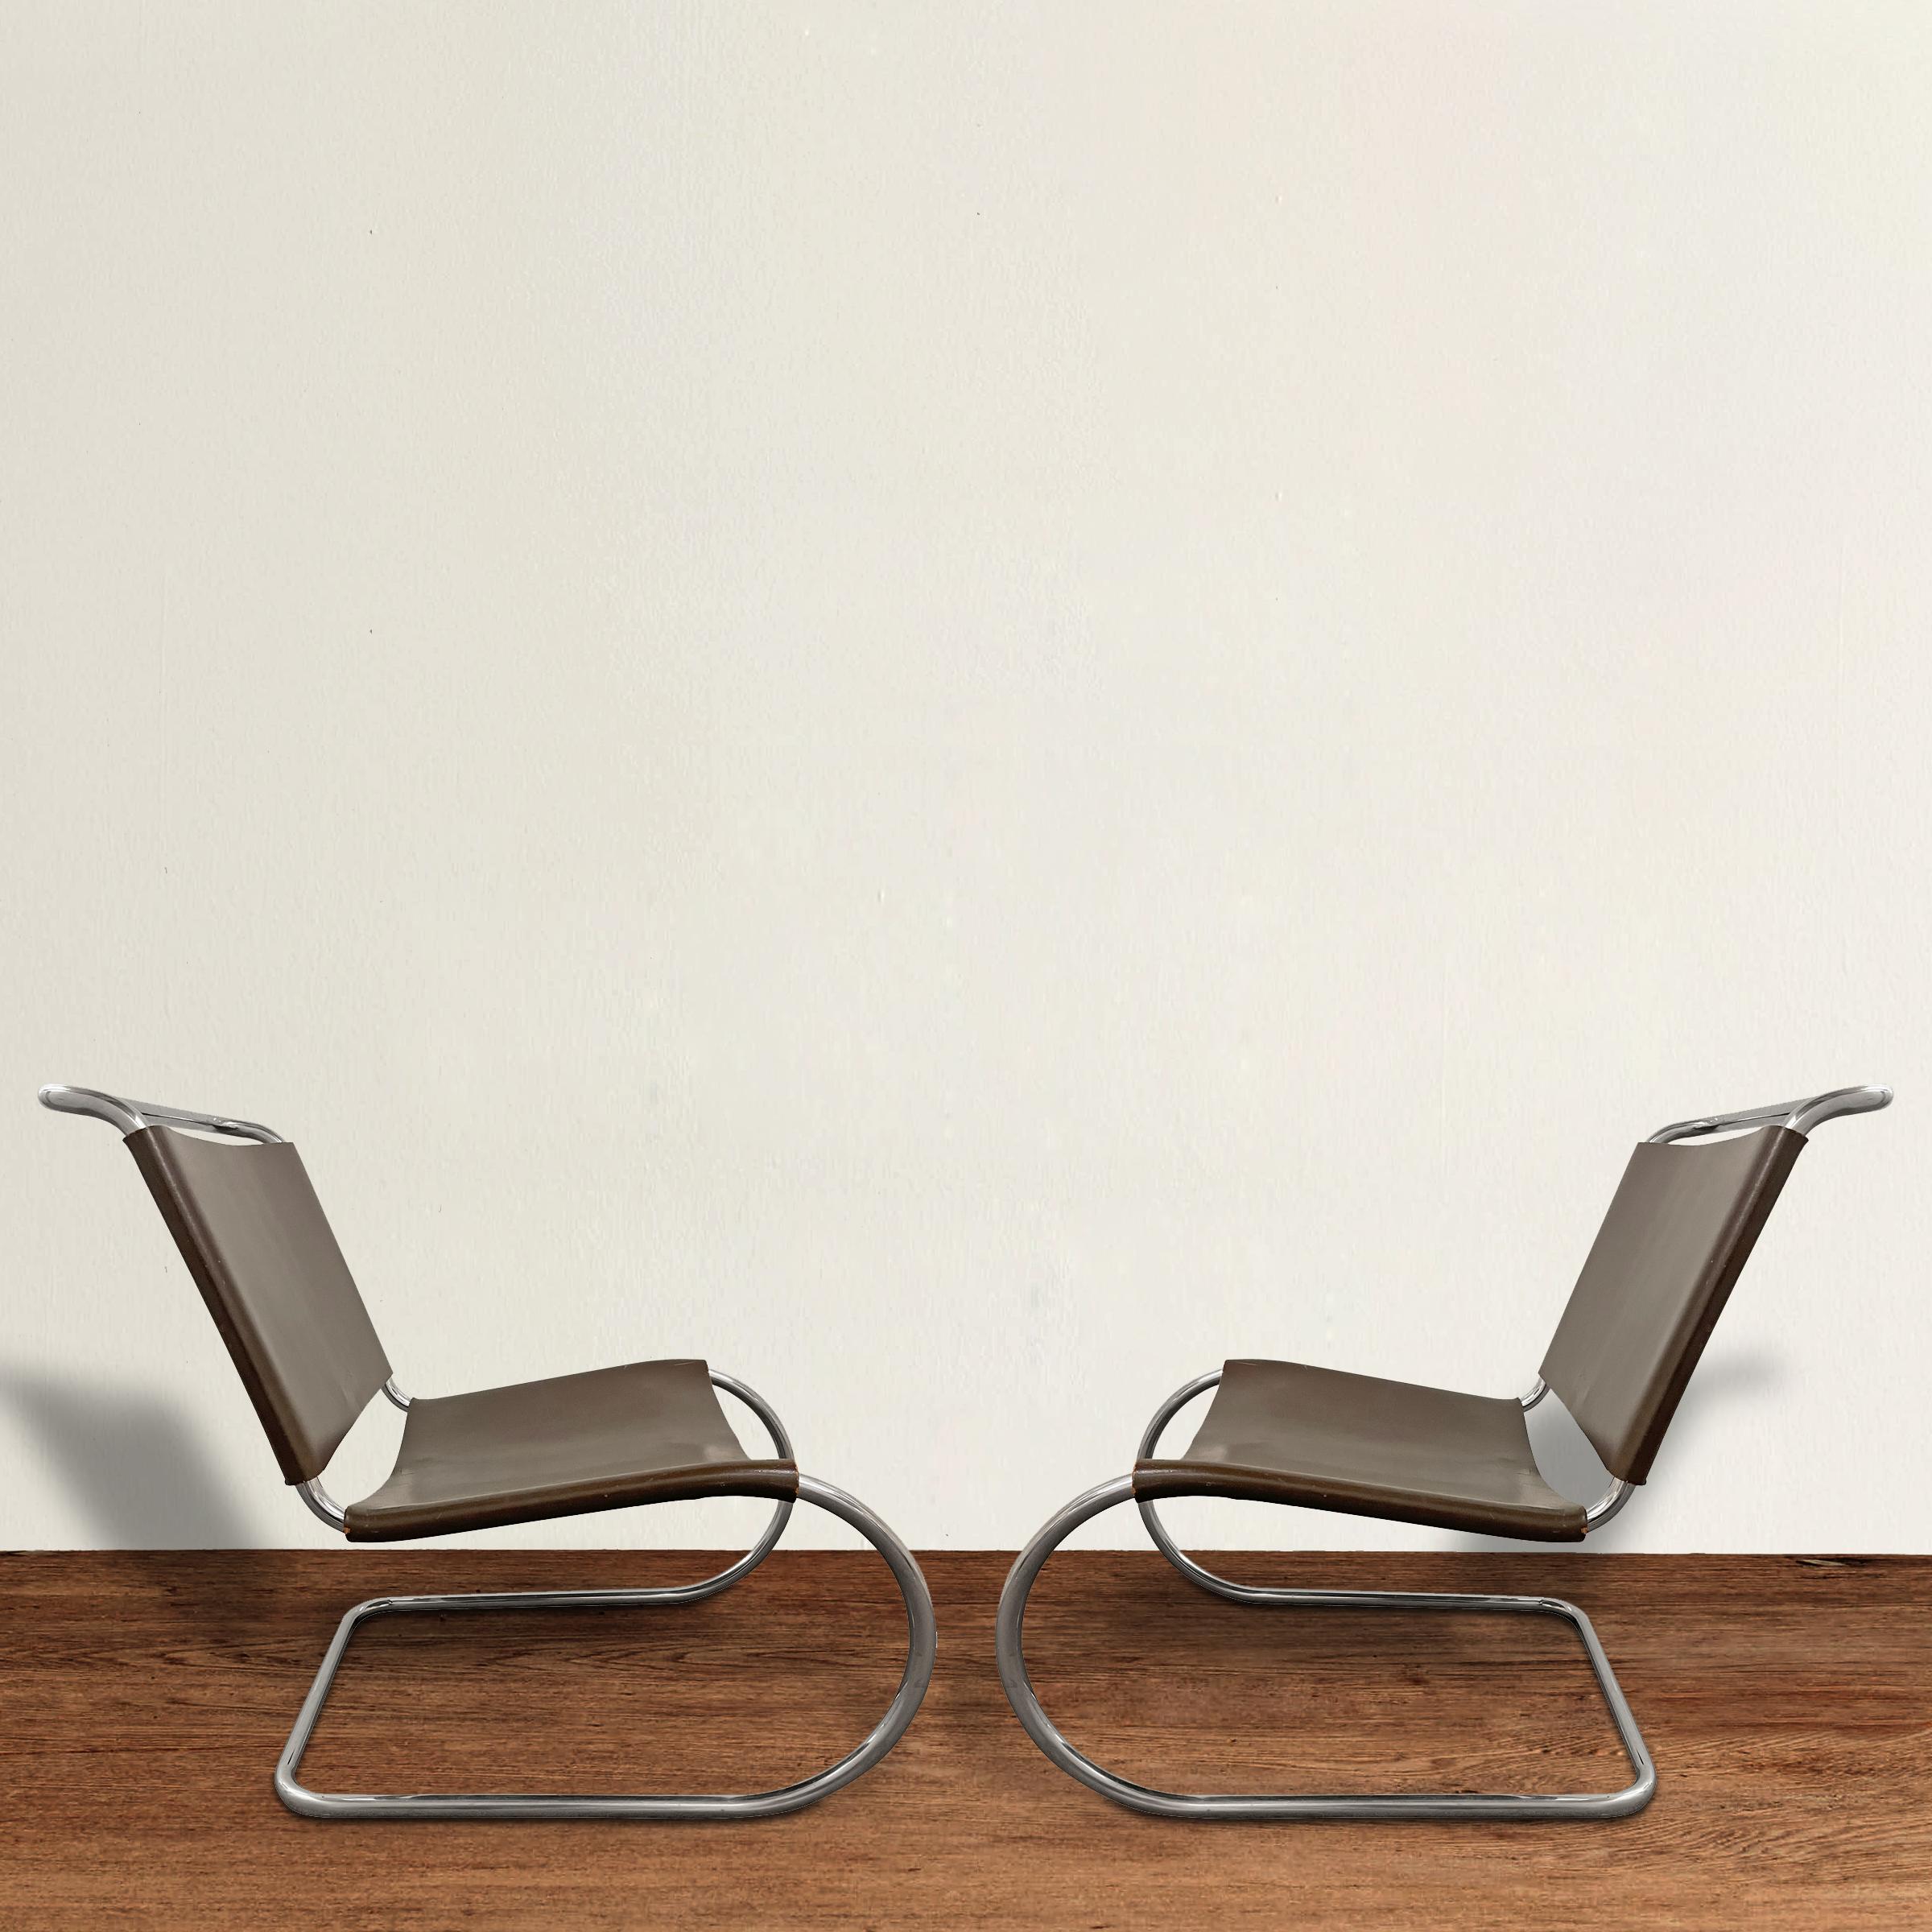 A rare pair of Mies van Der Rohe for Knoll MR 30/5 lounge chairs constructed from tubular chromed steel frames and with their original brown saddle leather seats and backs. Each chair retains its original Knoll sticker. This chair design has been